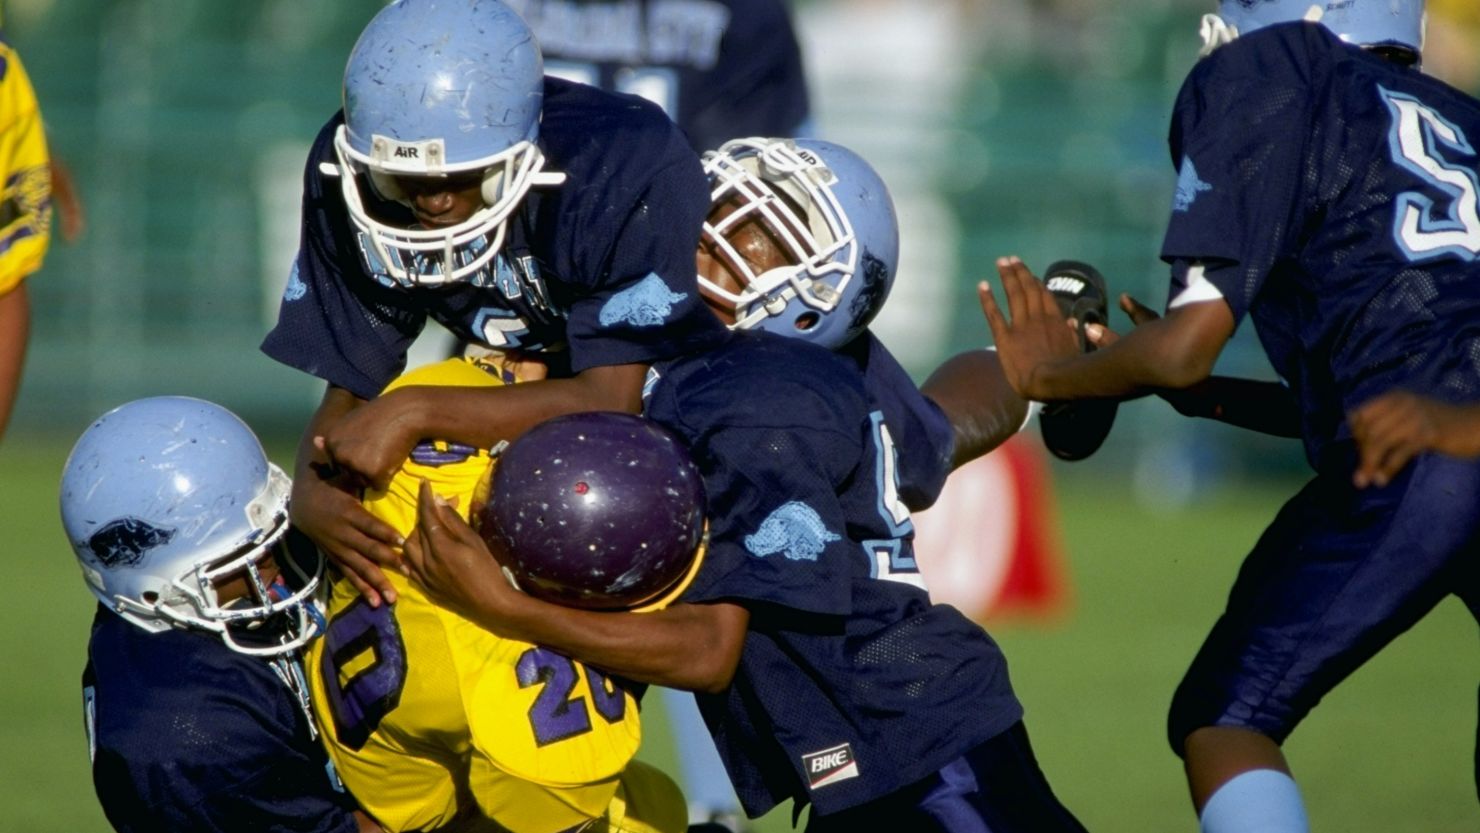 Players compete during the Pop Warner Pee Wee Football Super Bowl in Orlando, Florida. 